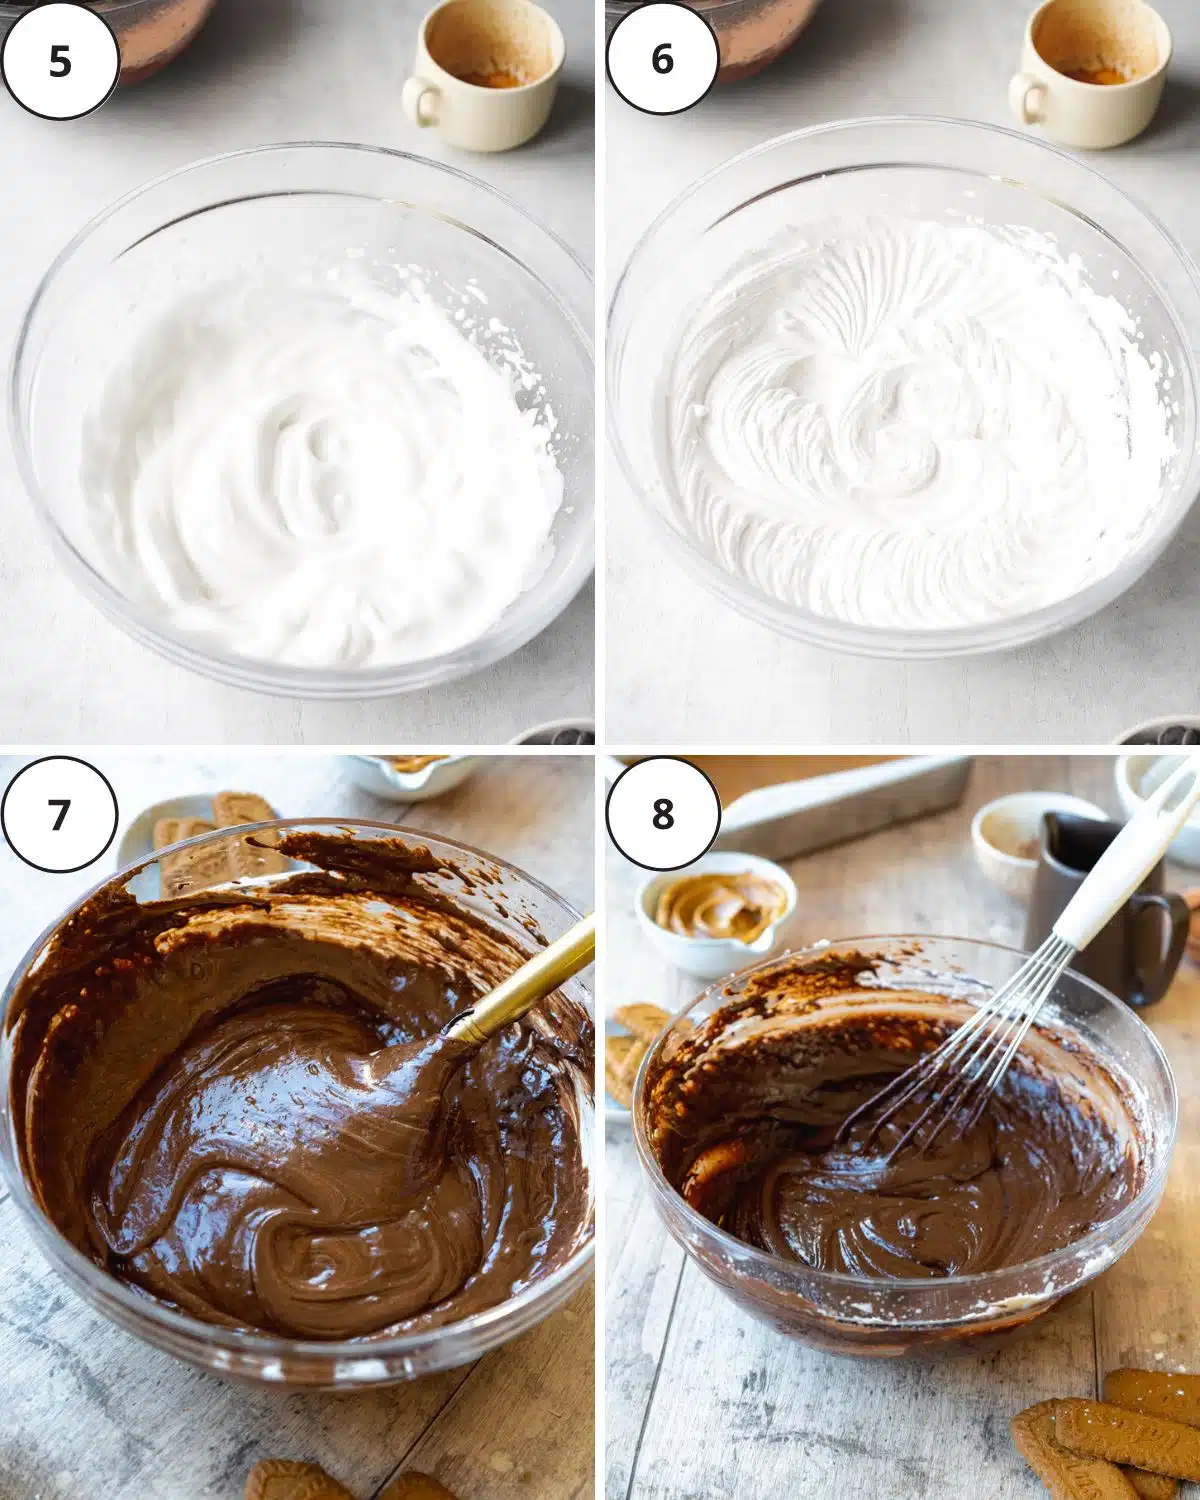 whipped aquafaba in a clear bowl and chocolate brownie batter in a clear bowl.